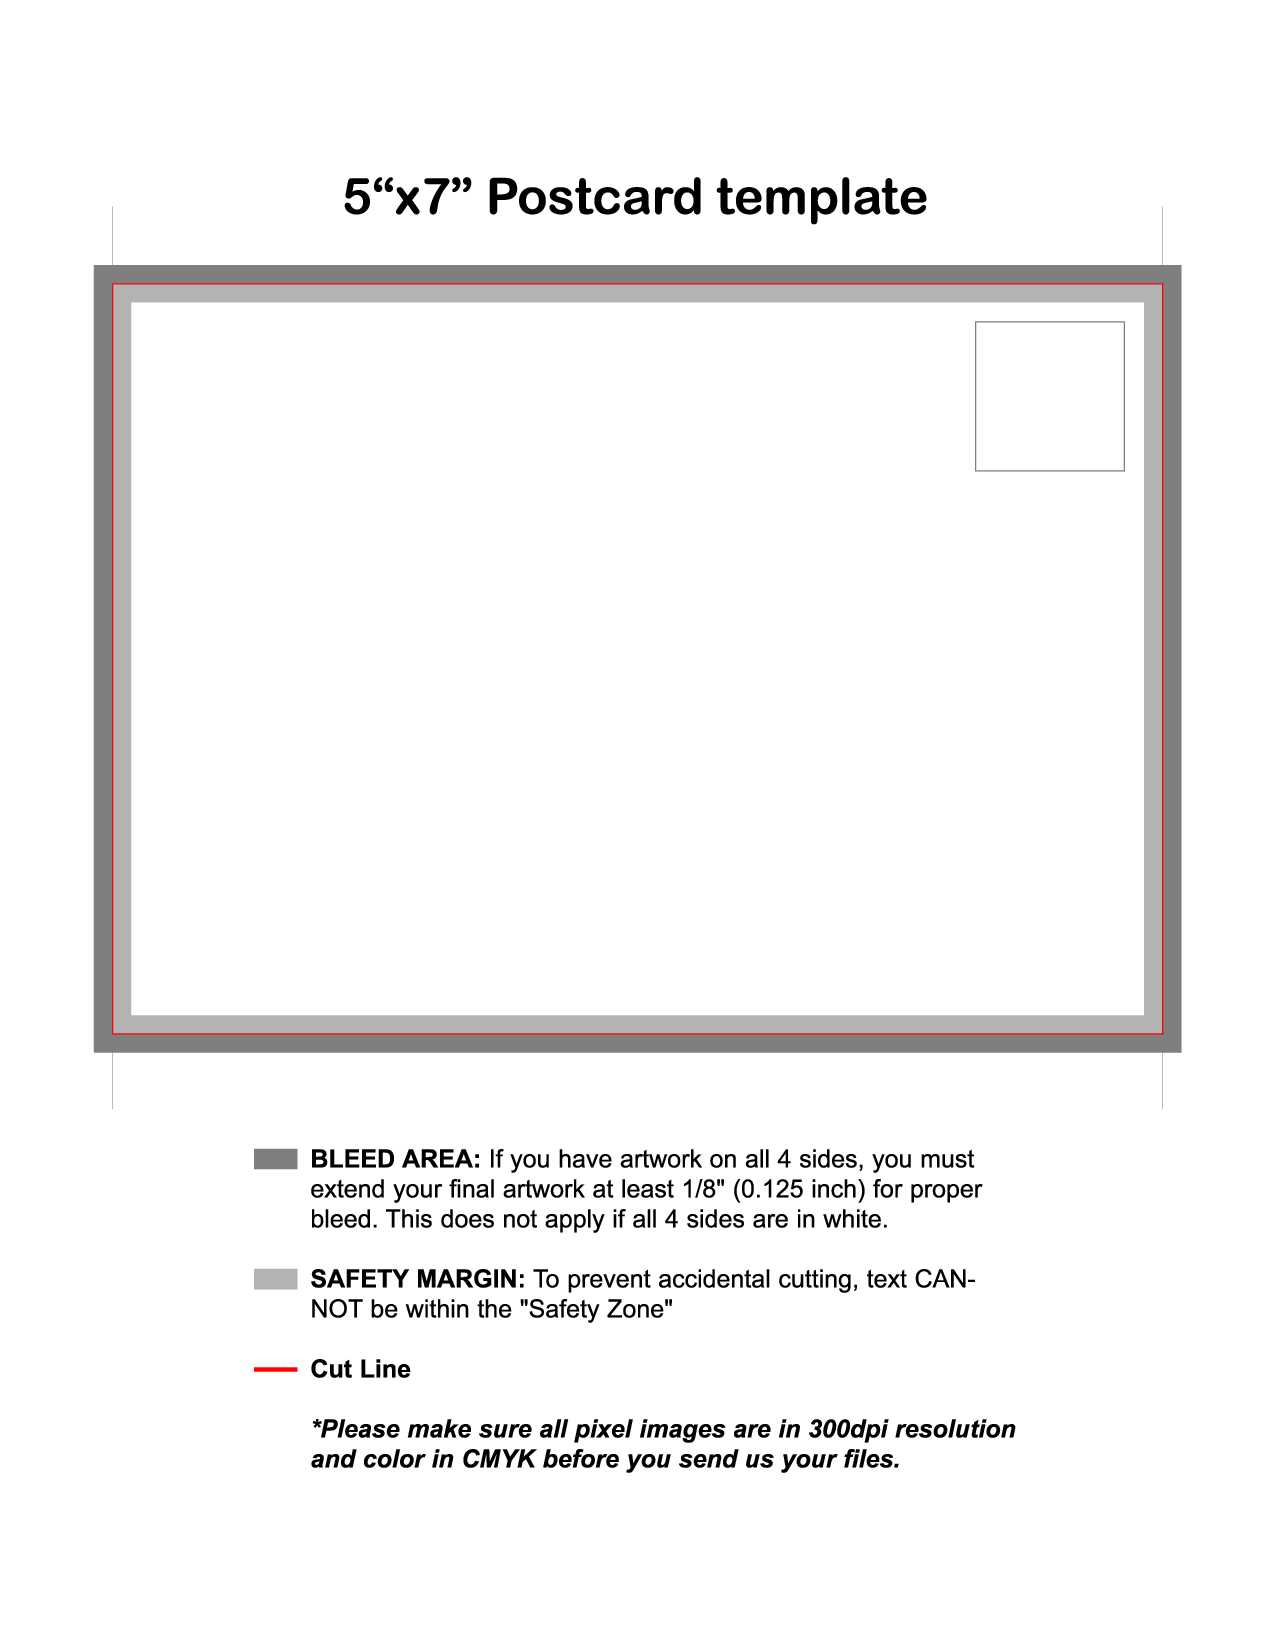 Equity Fax Template Word 2010 – Takub With Fax Template Word 2010